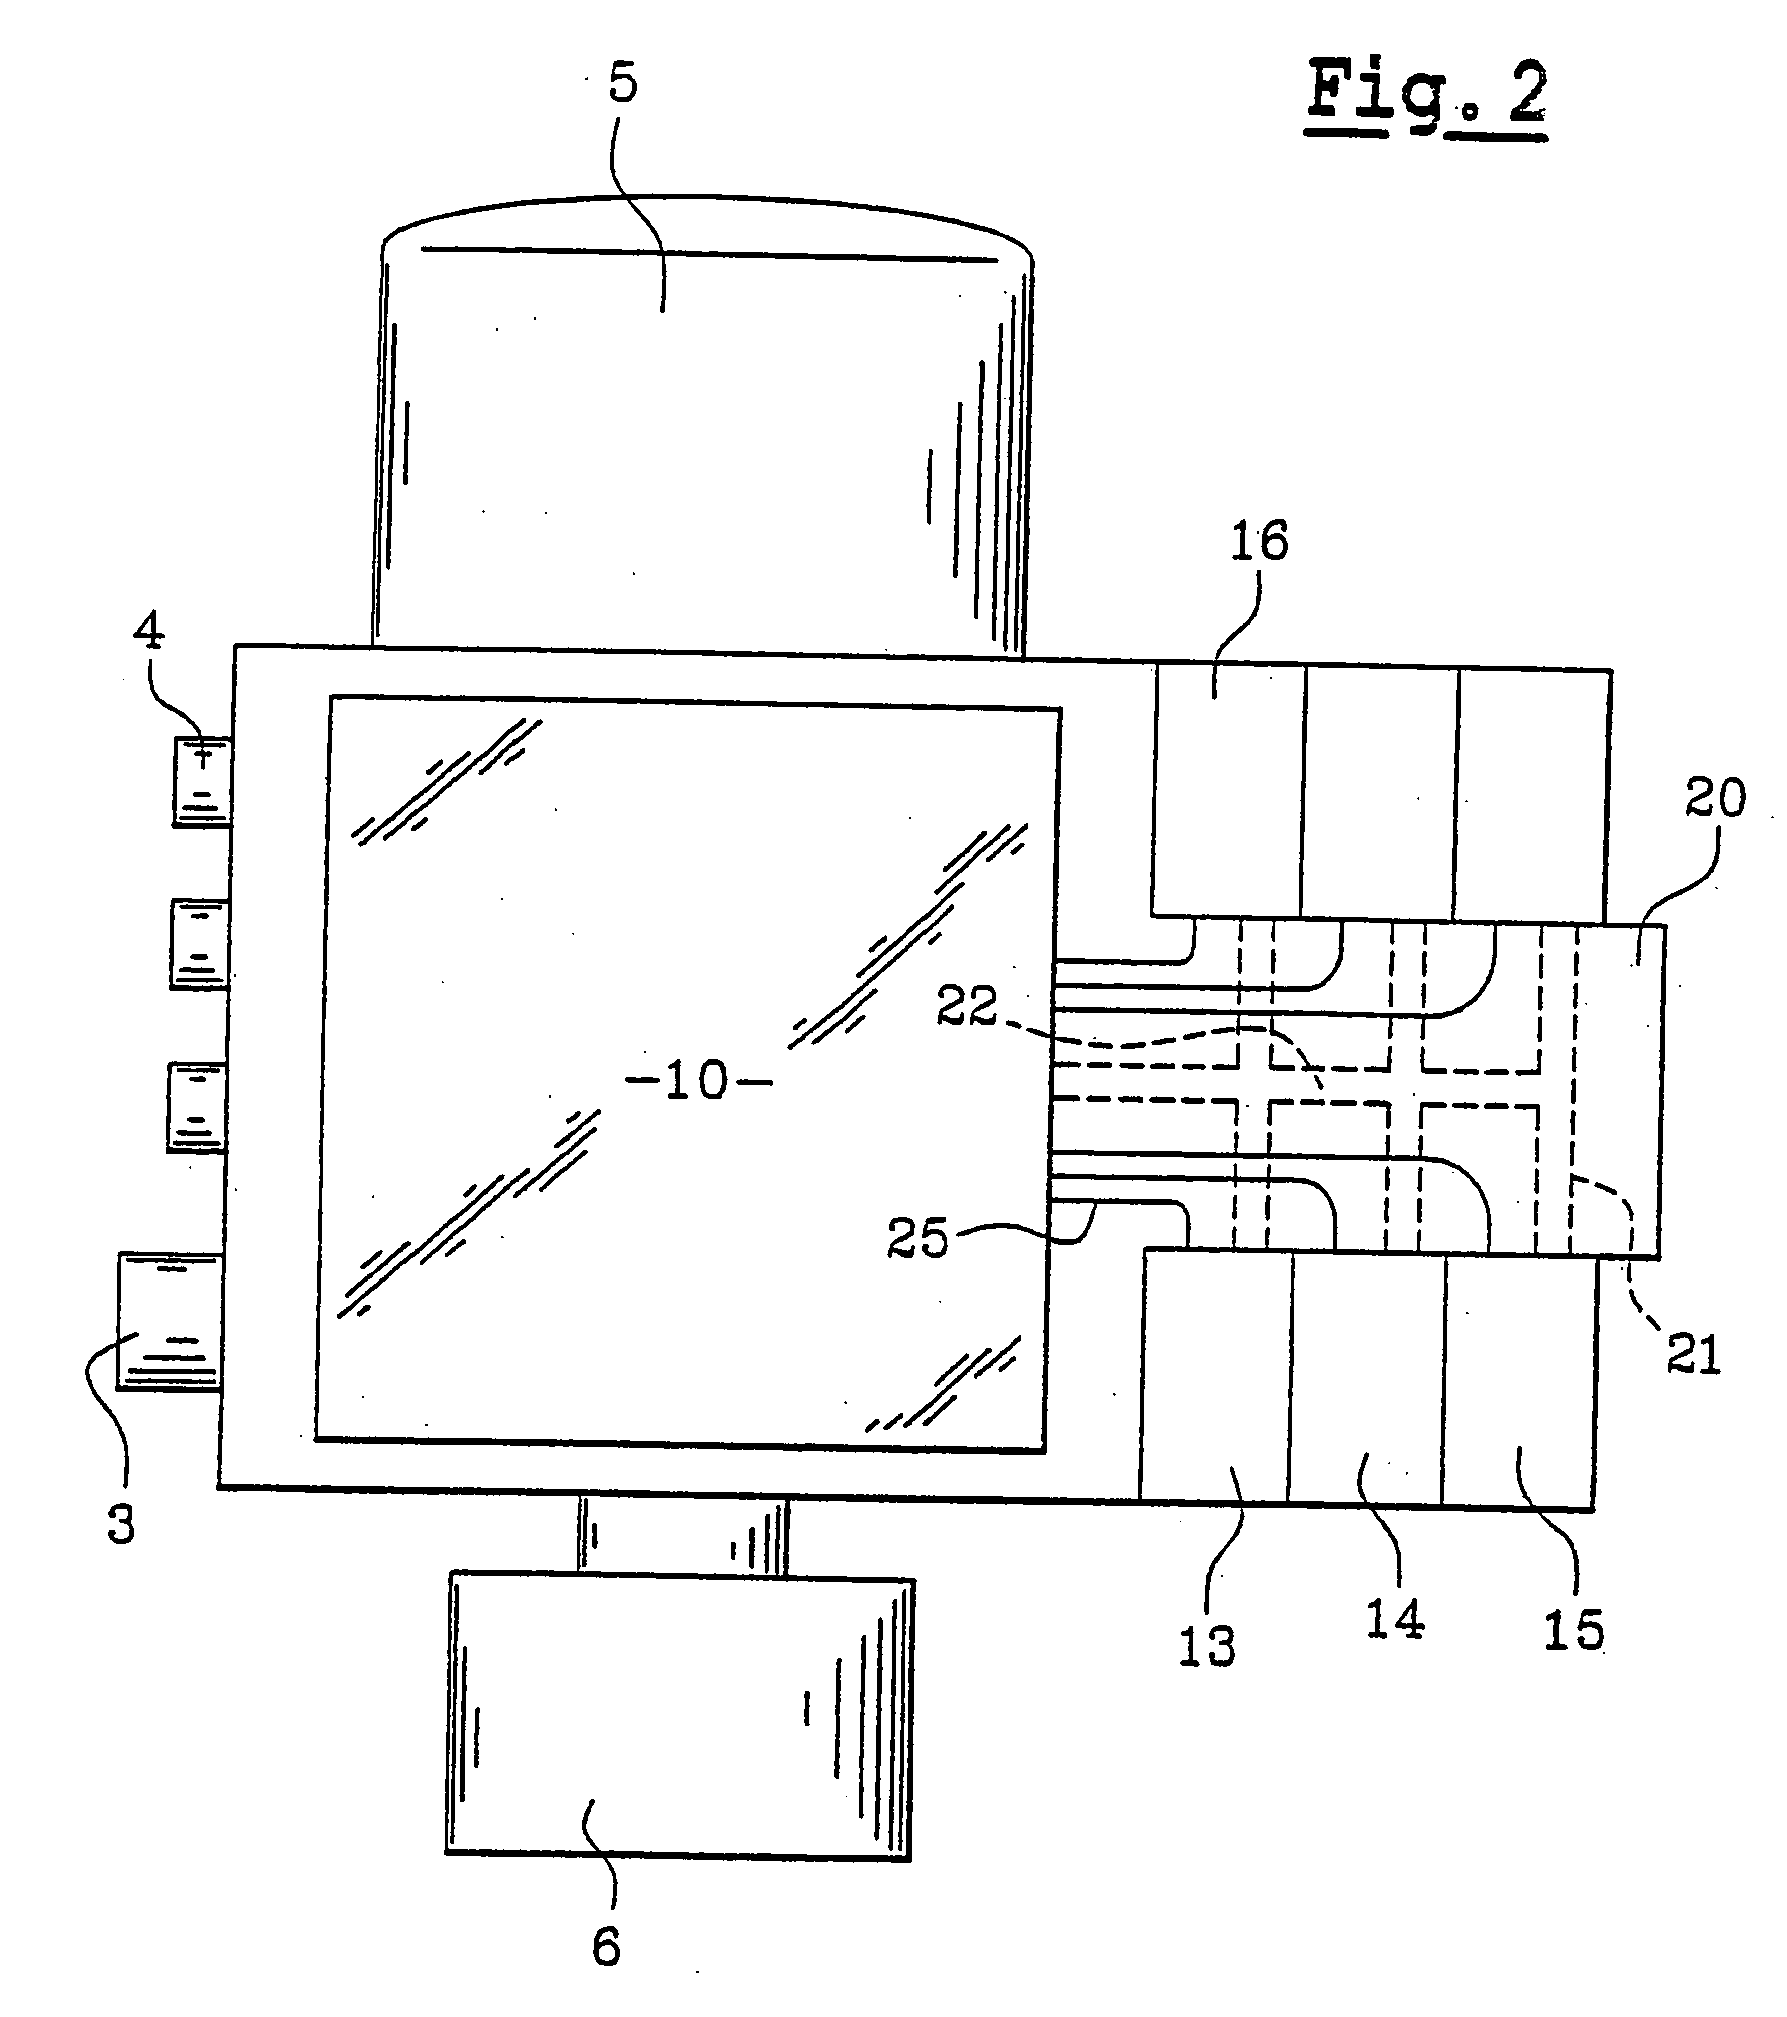 Compressed air treatment device that is designed to be installed in an industrial vehicle